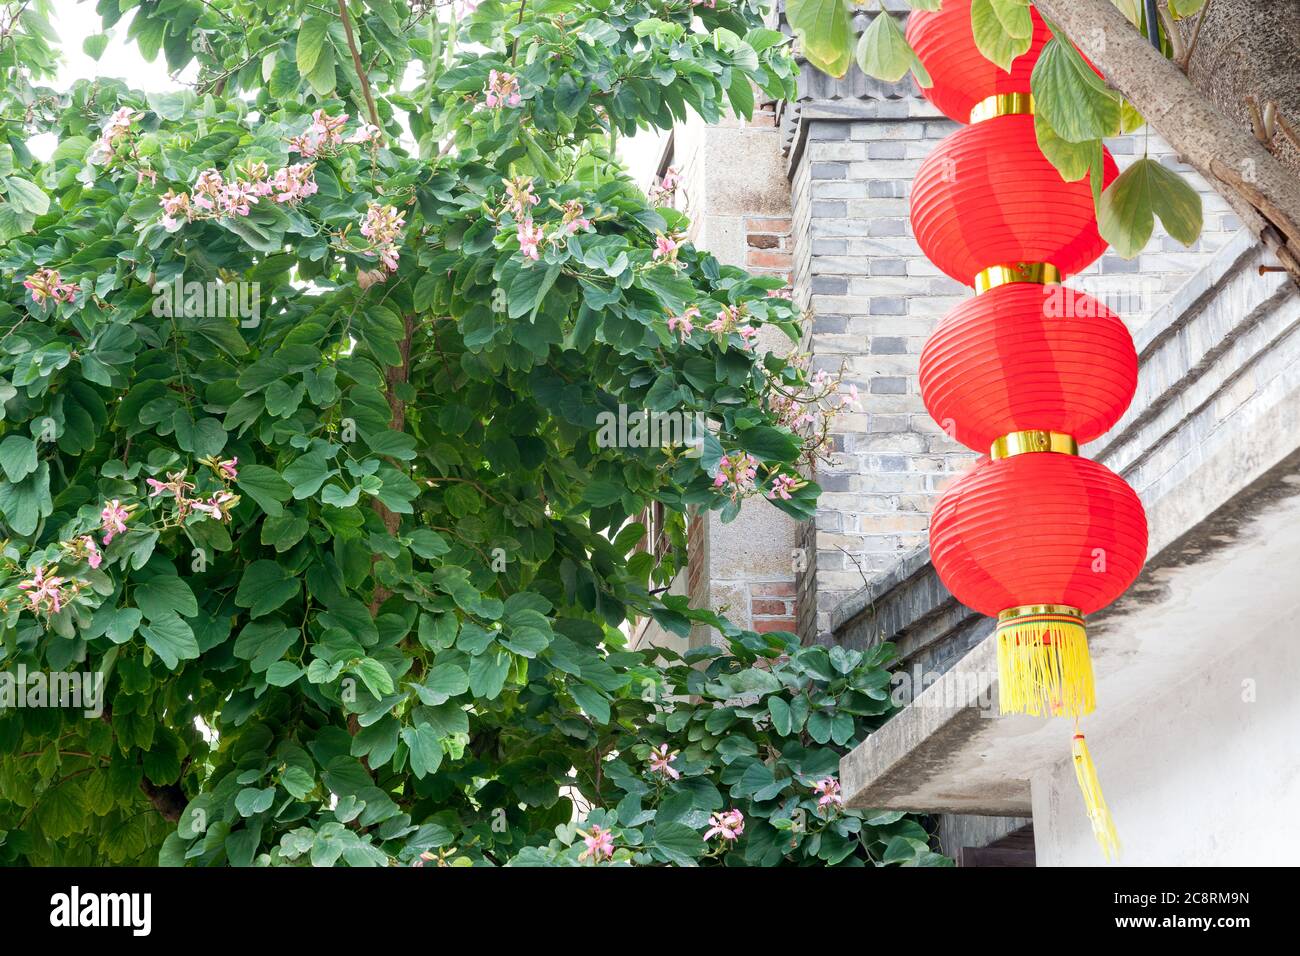 Decorative red lantern hanging on a tree with brick wall and bauhinia tree background,China Stock Photo